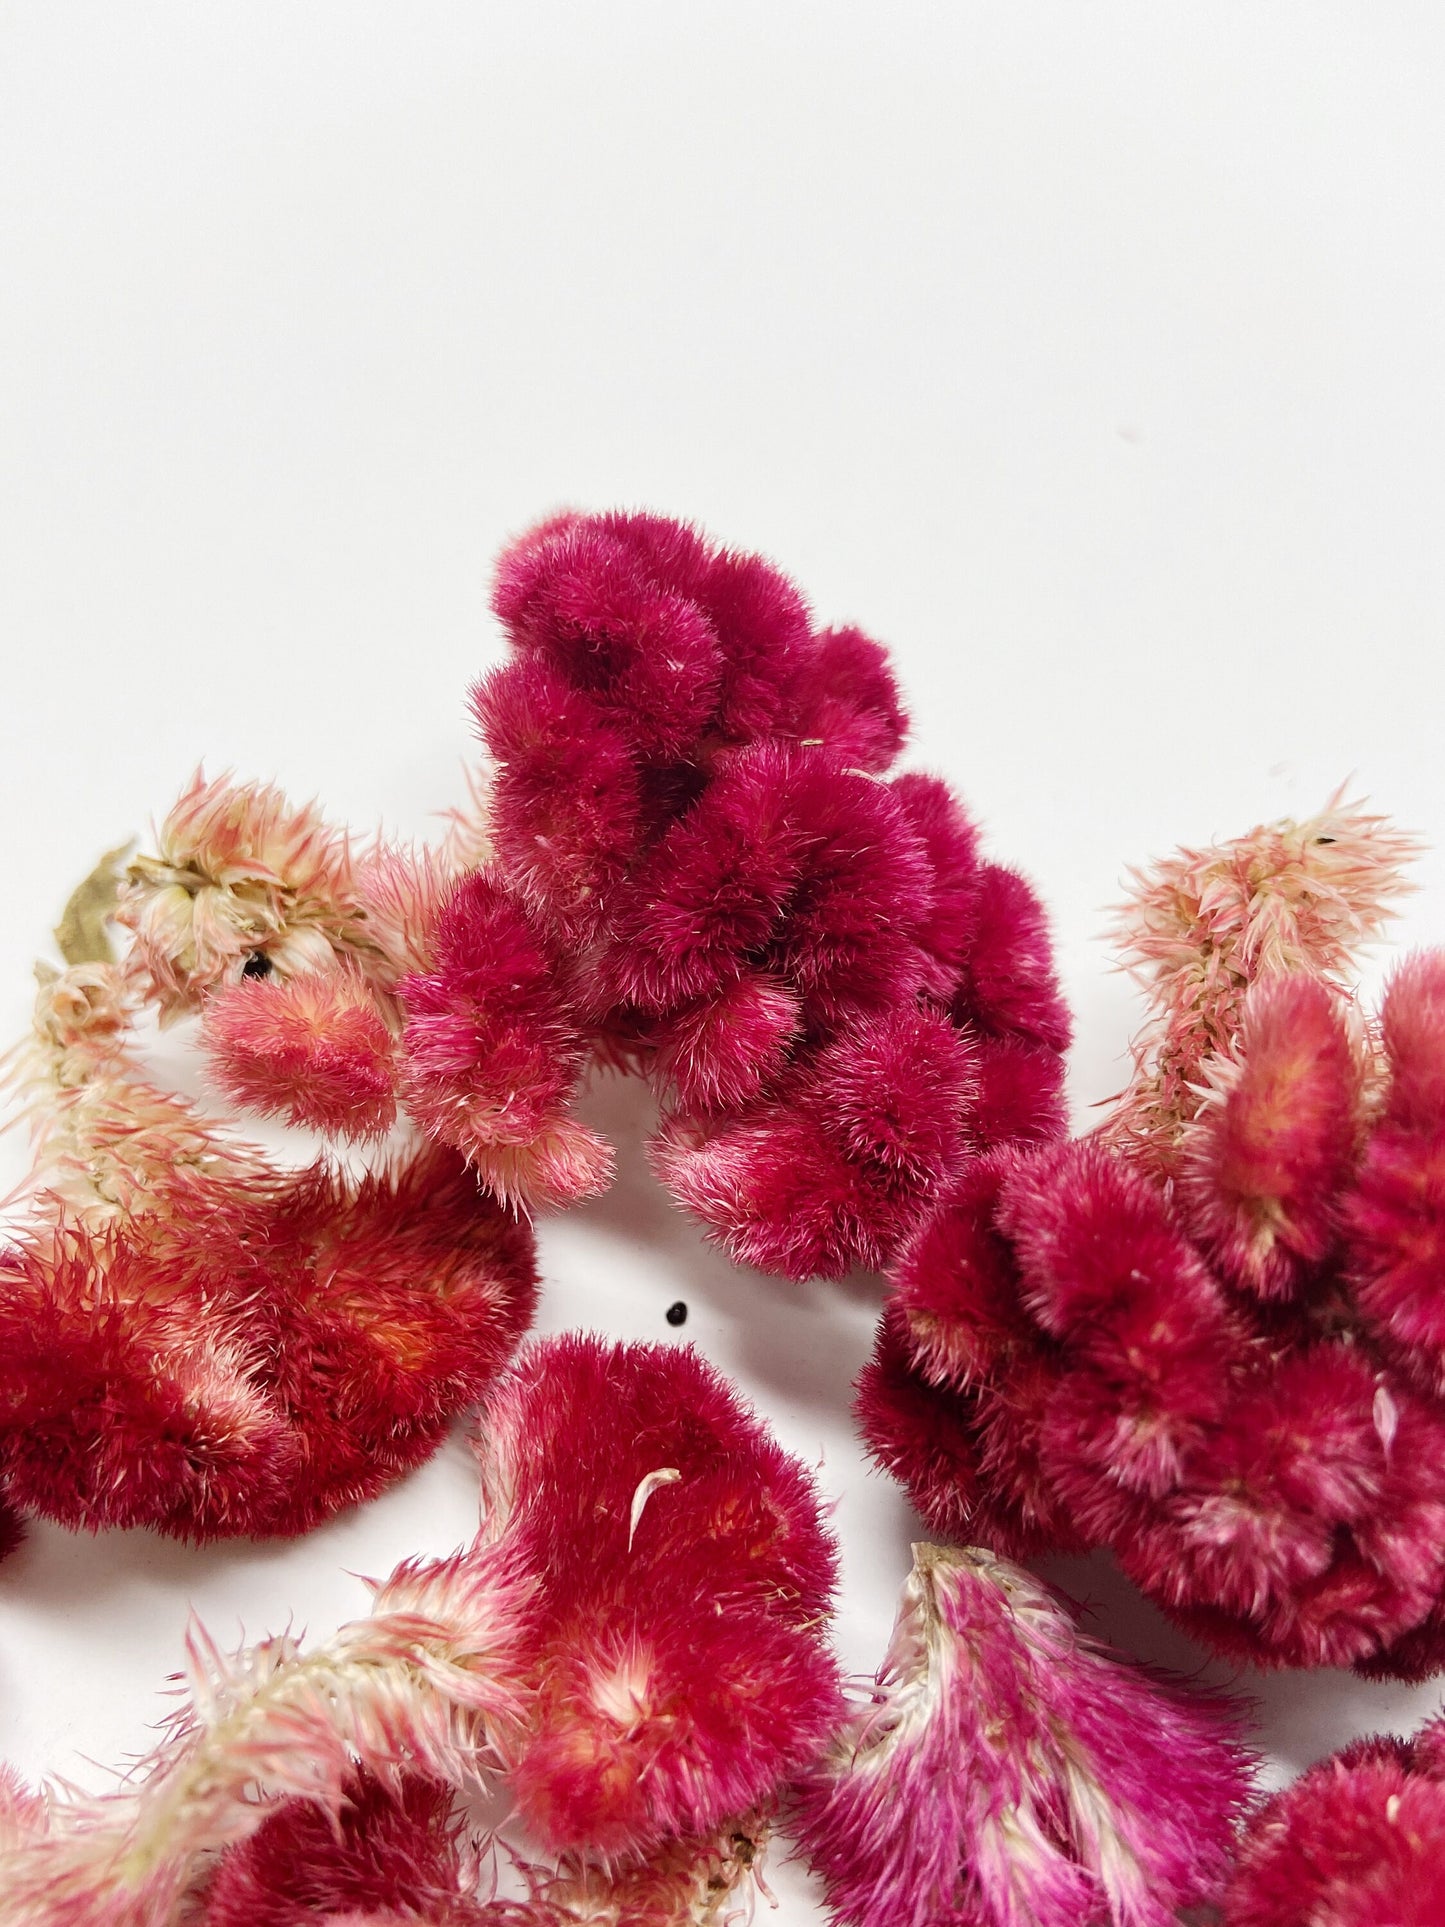 Coxcomb heads, celosia, small heads, decoration, burgundy cockscomb, details, preserved flowers, dried flowers, diy, craft, arts and crafts